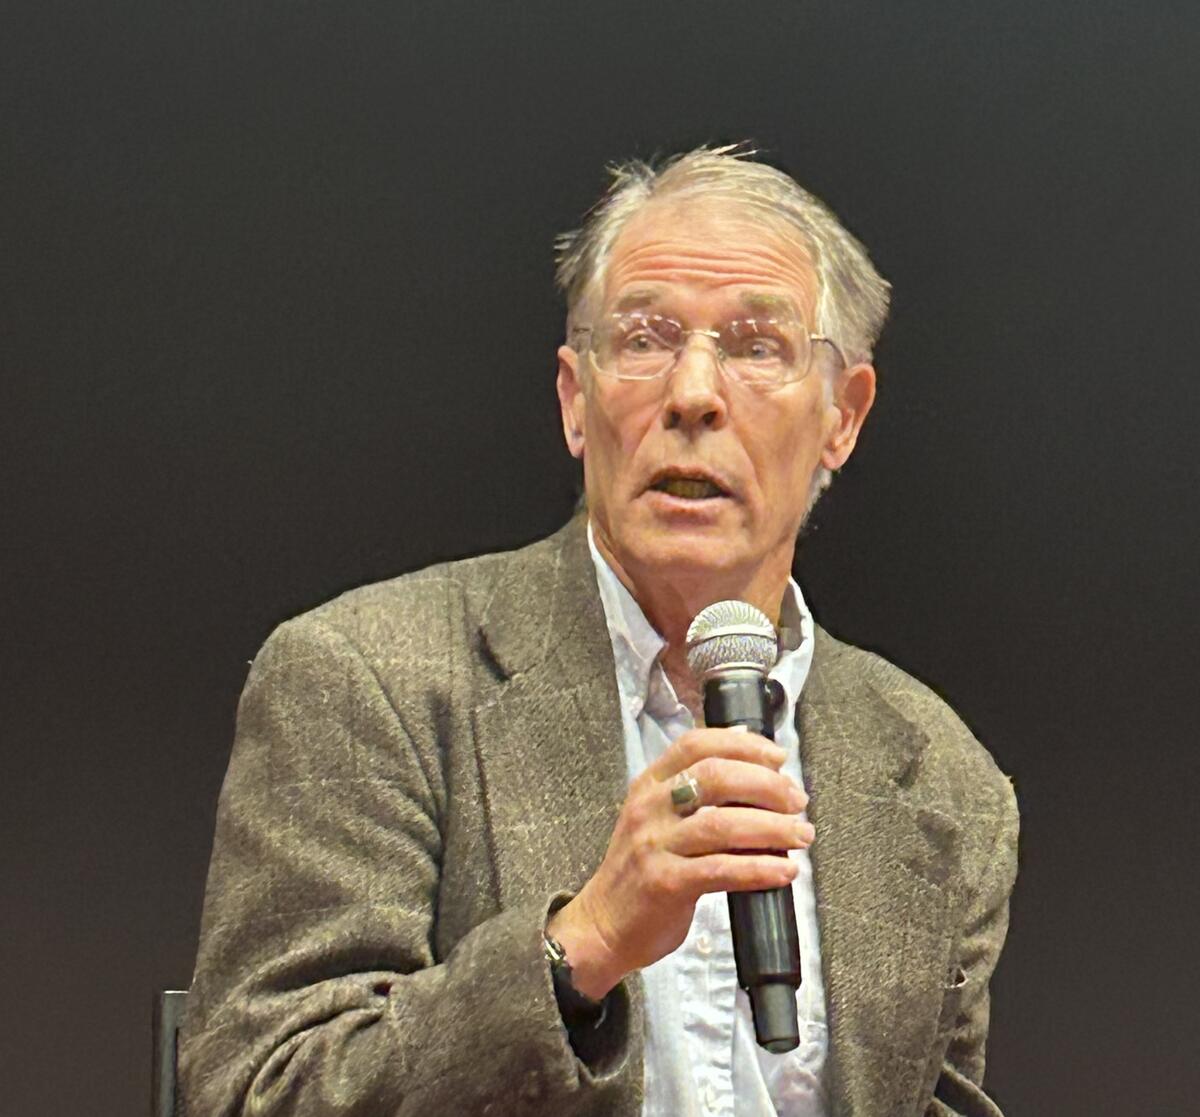 Photo of Kim Stanley Robinson, a man with a pale skin tone and gray hair, speaking on stage and holding a microphone. He is wearing a light gray blazer and a light blue collar shirt. He wears glasses.